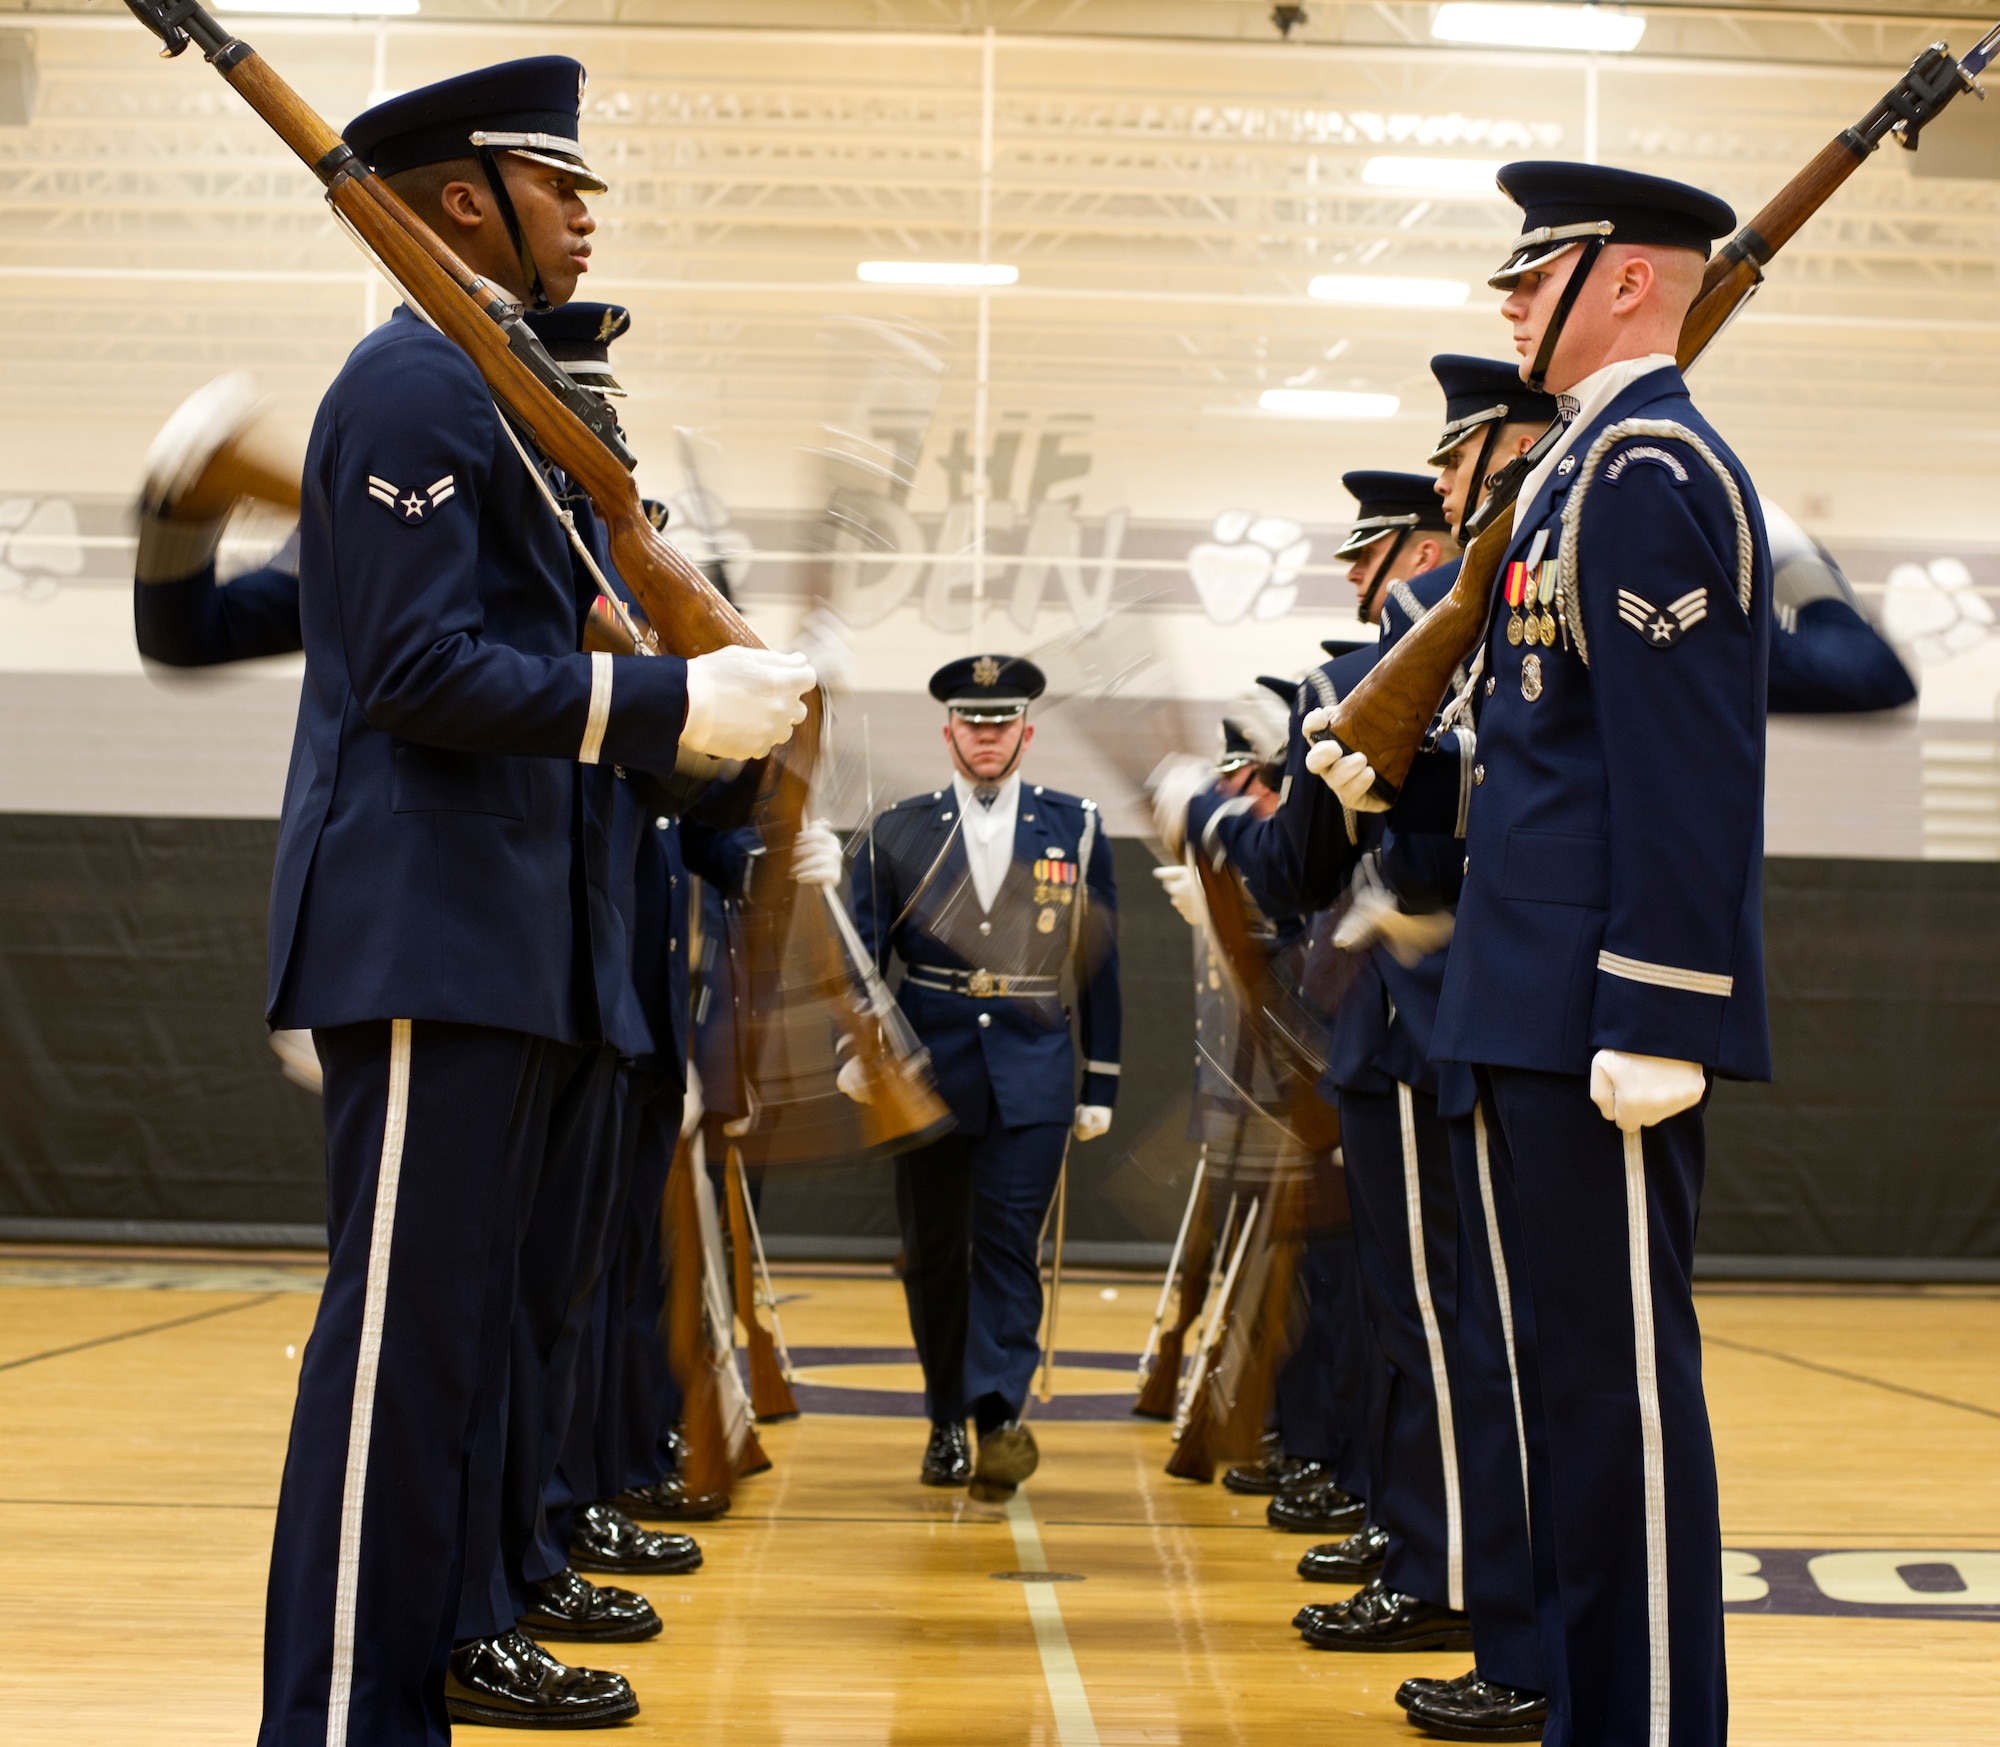 The U.S. Air Force Honor Guard Drill Team spins their weapons at full speed as Capt. Alexander Stanton, U.S. Air Force Honor Guard Drill Team commander, walks through during a performance at Battlefield High School on Feb. 6, 2013, in Haymarket, Va. The performance was Stanton’s final performance with the Drill Team. (U.S. Air Force photo/ Senior Airman Bahja Joi Jones)